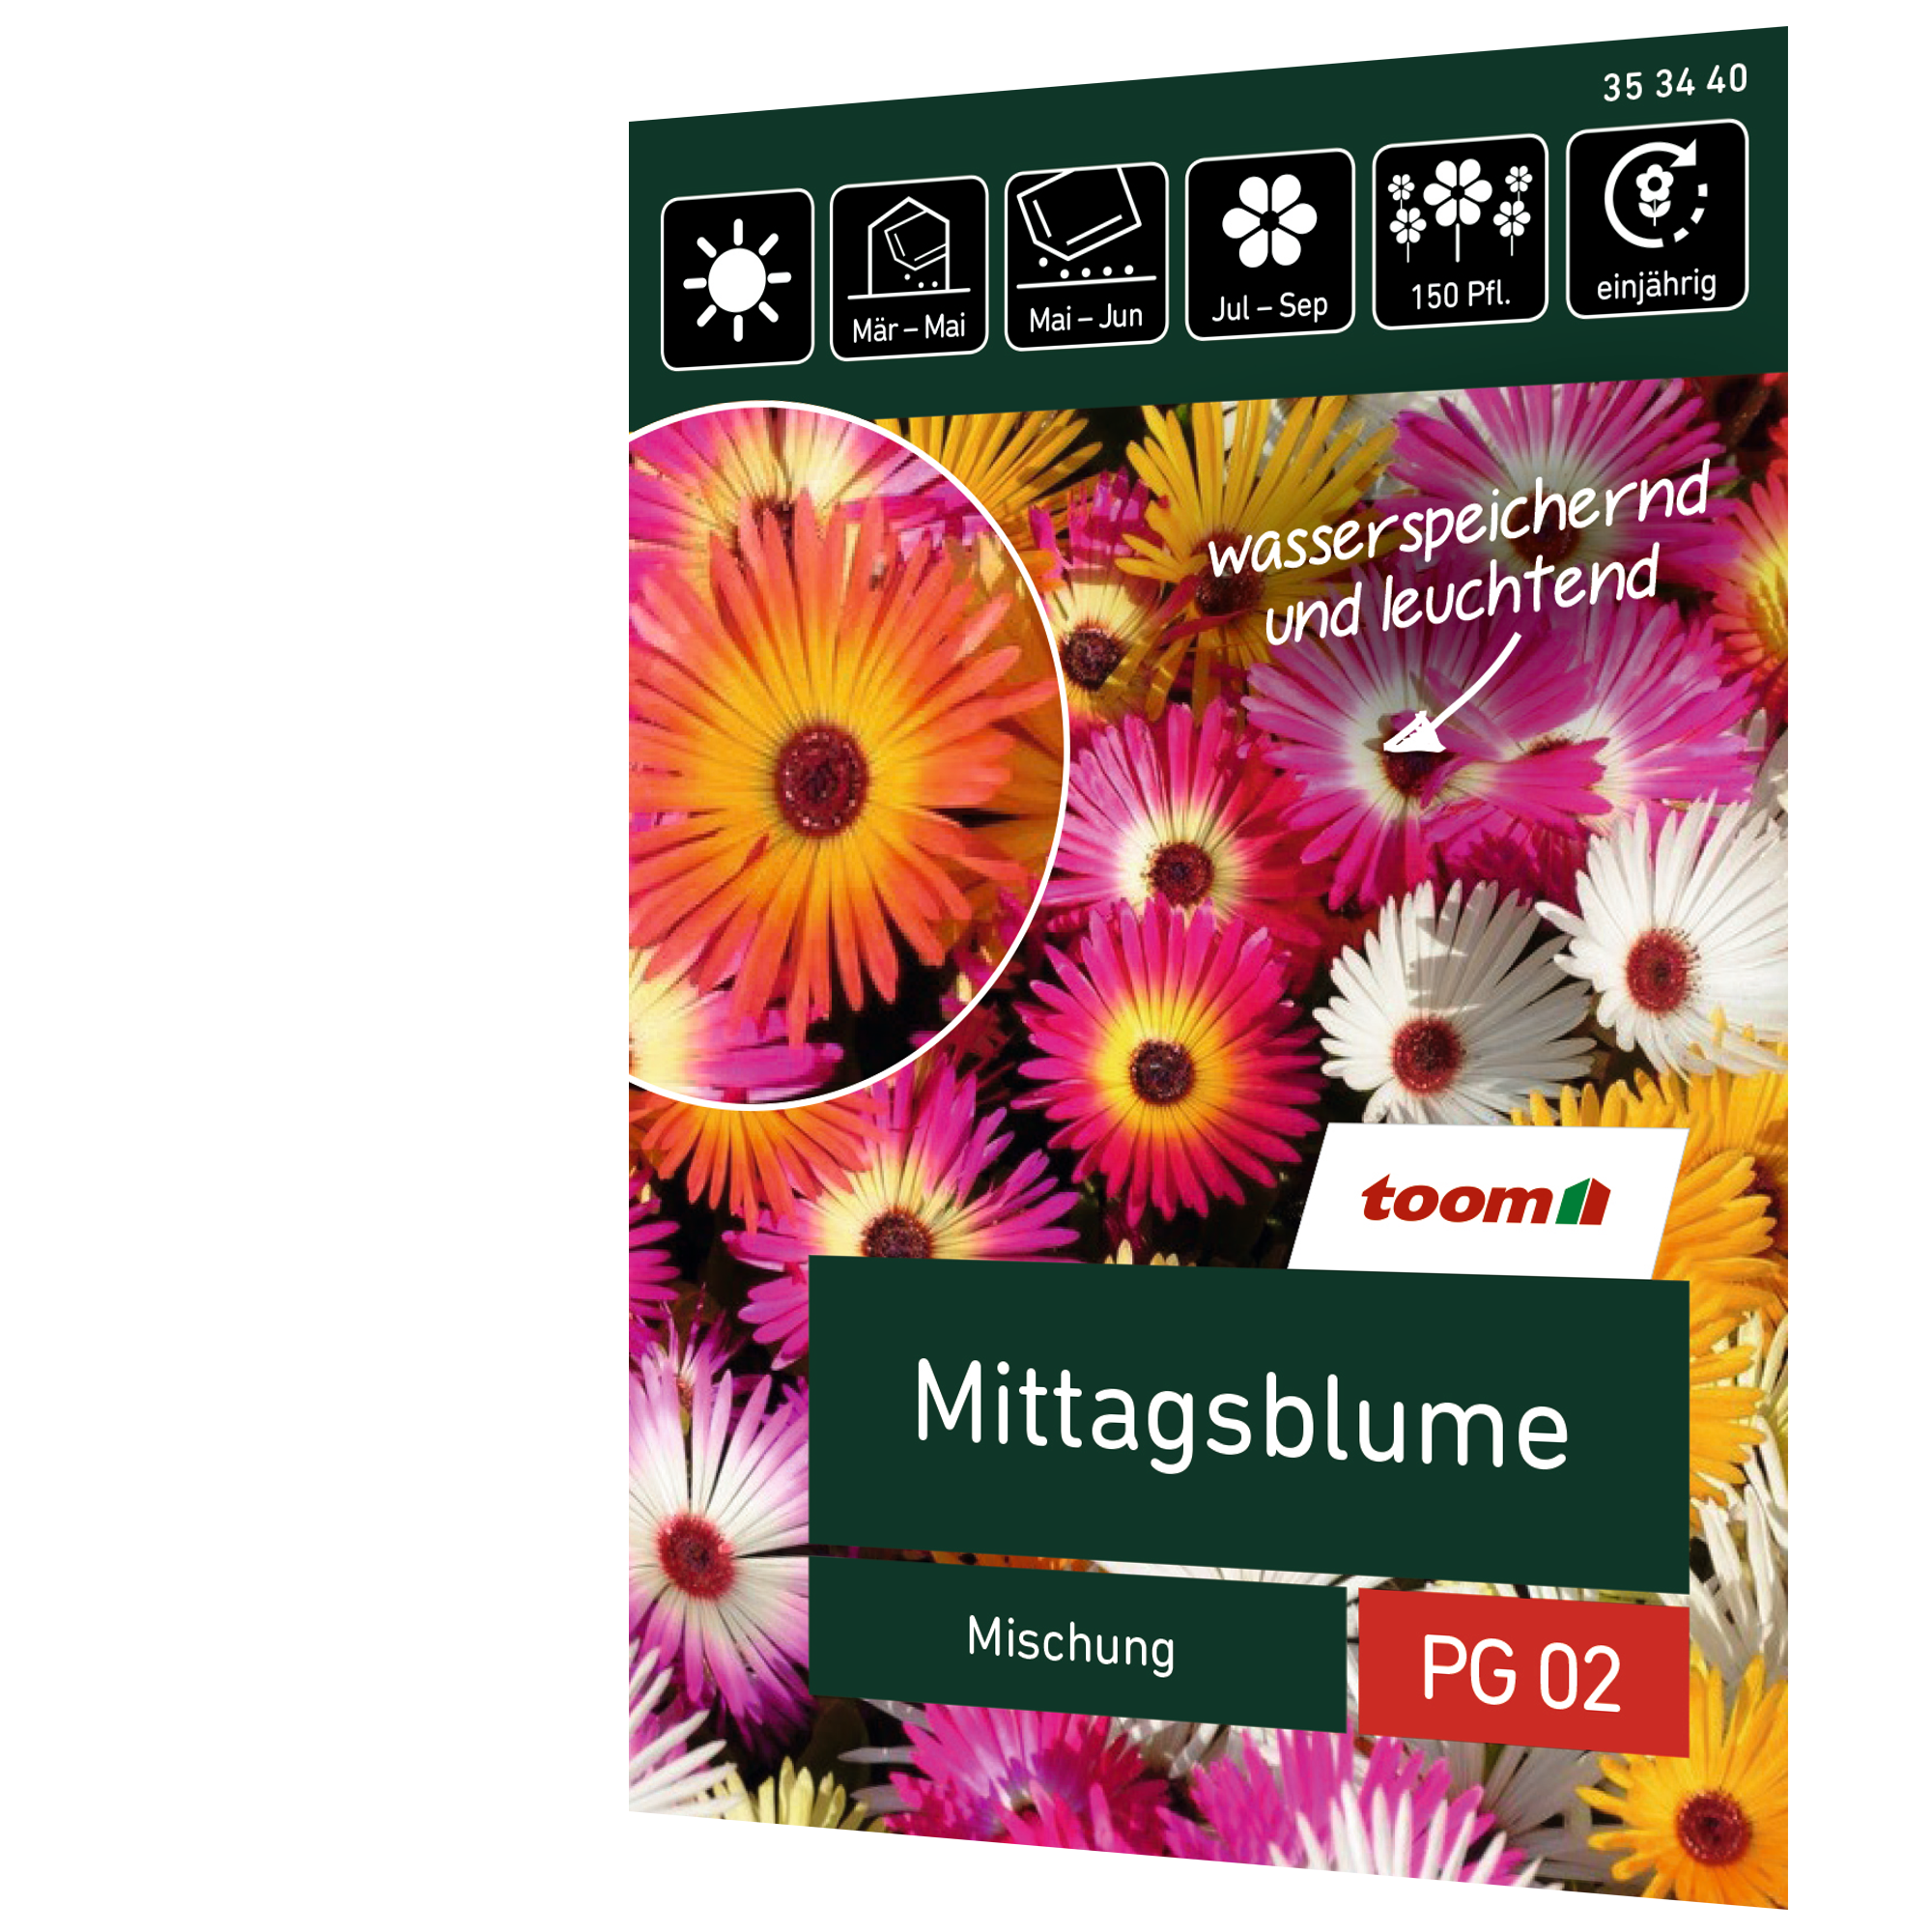 Mittagsblume 'Mischung' + product picture